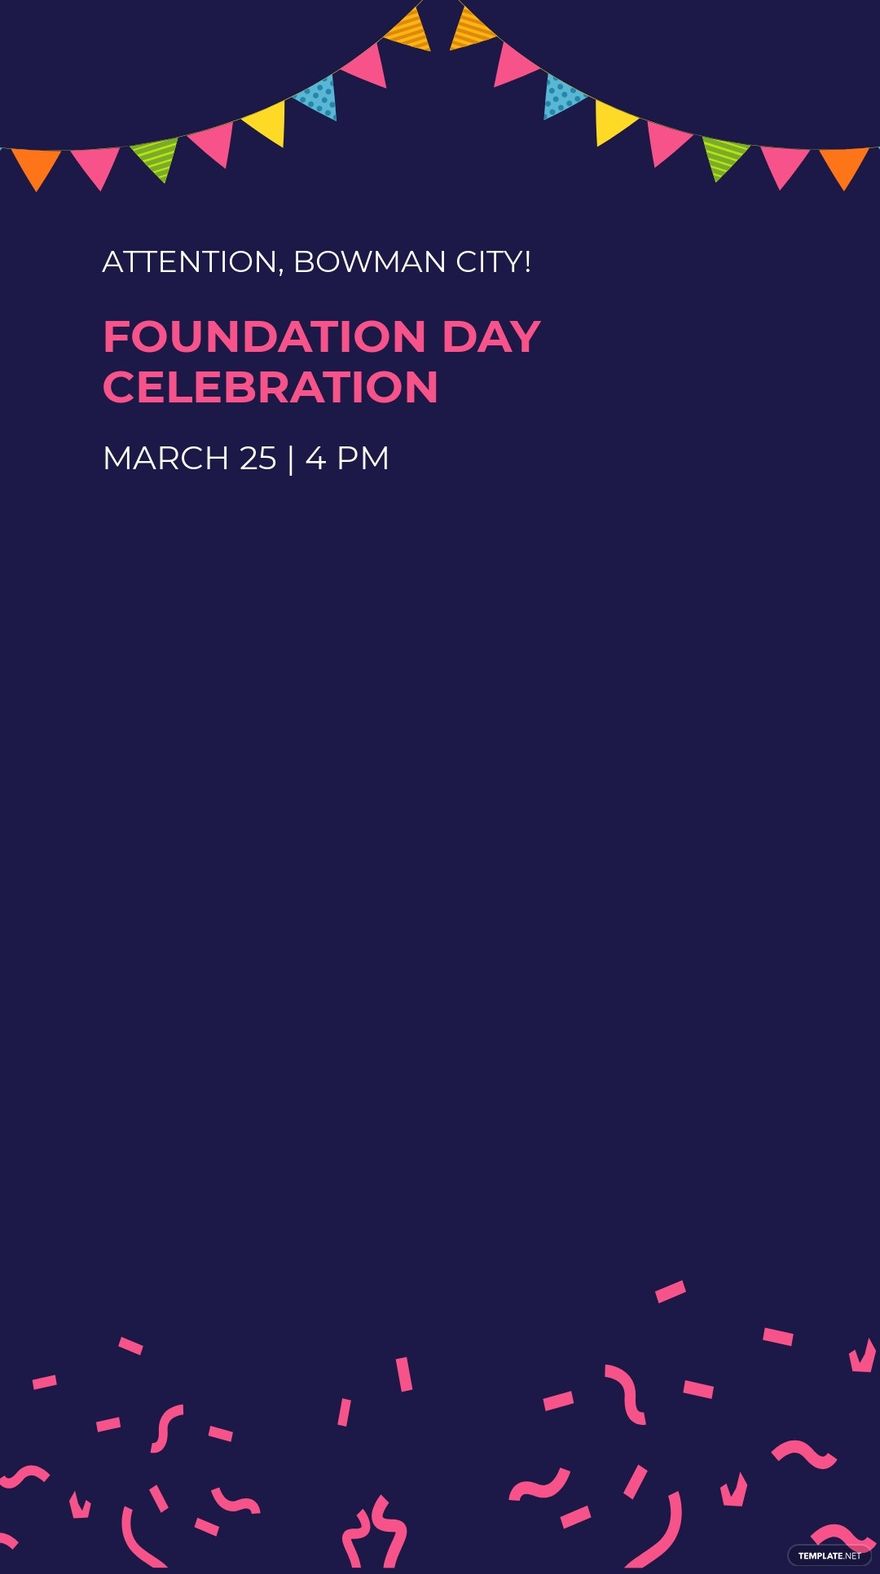 Free Event Announcement Snapchat Geofilter Template